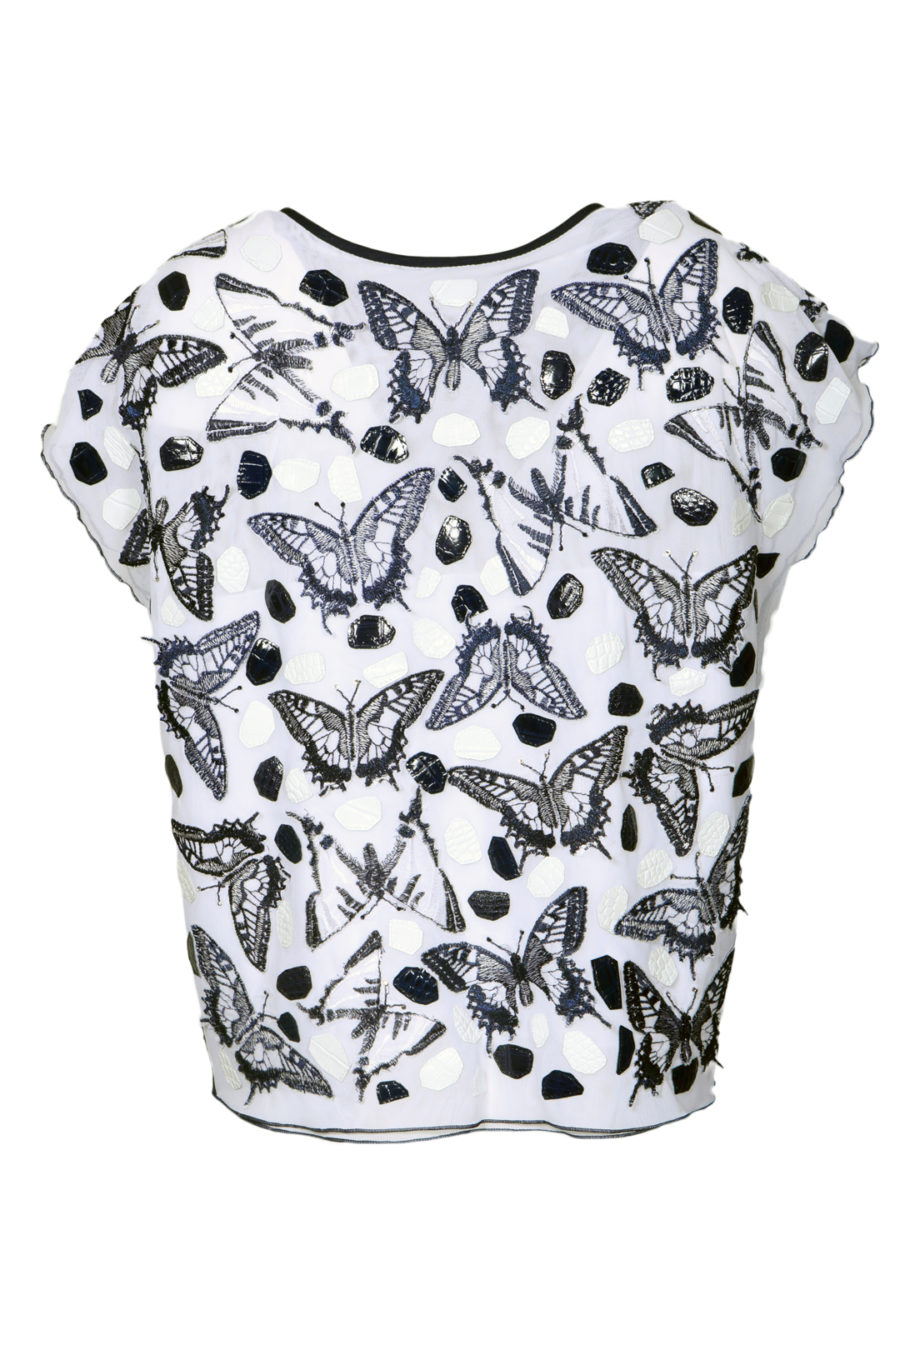 Blouse, white, hand-applied butterflies